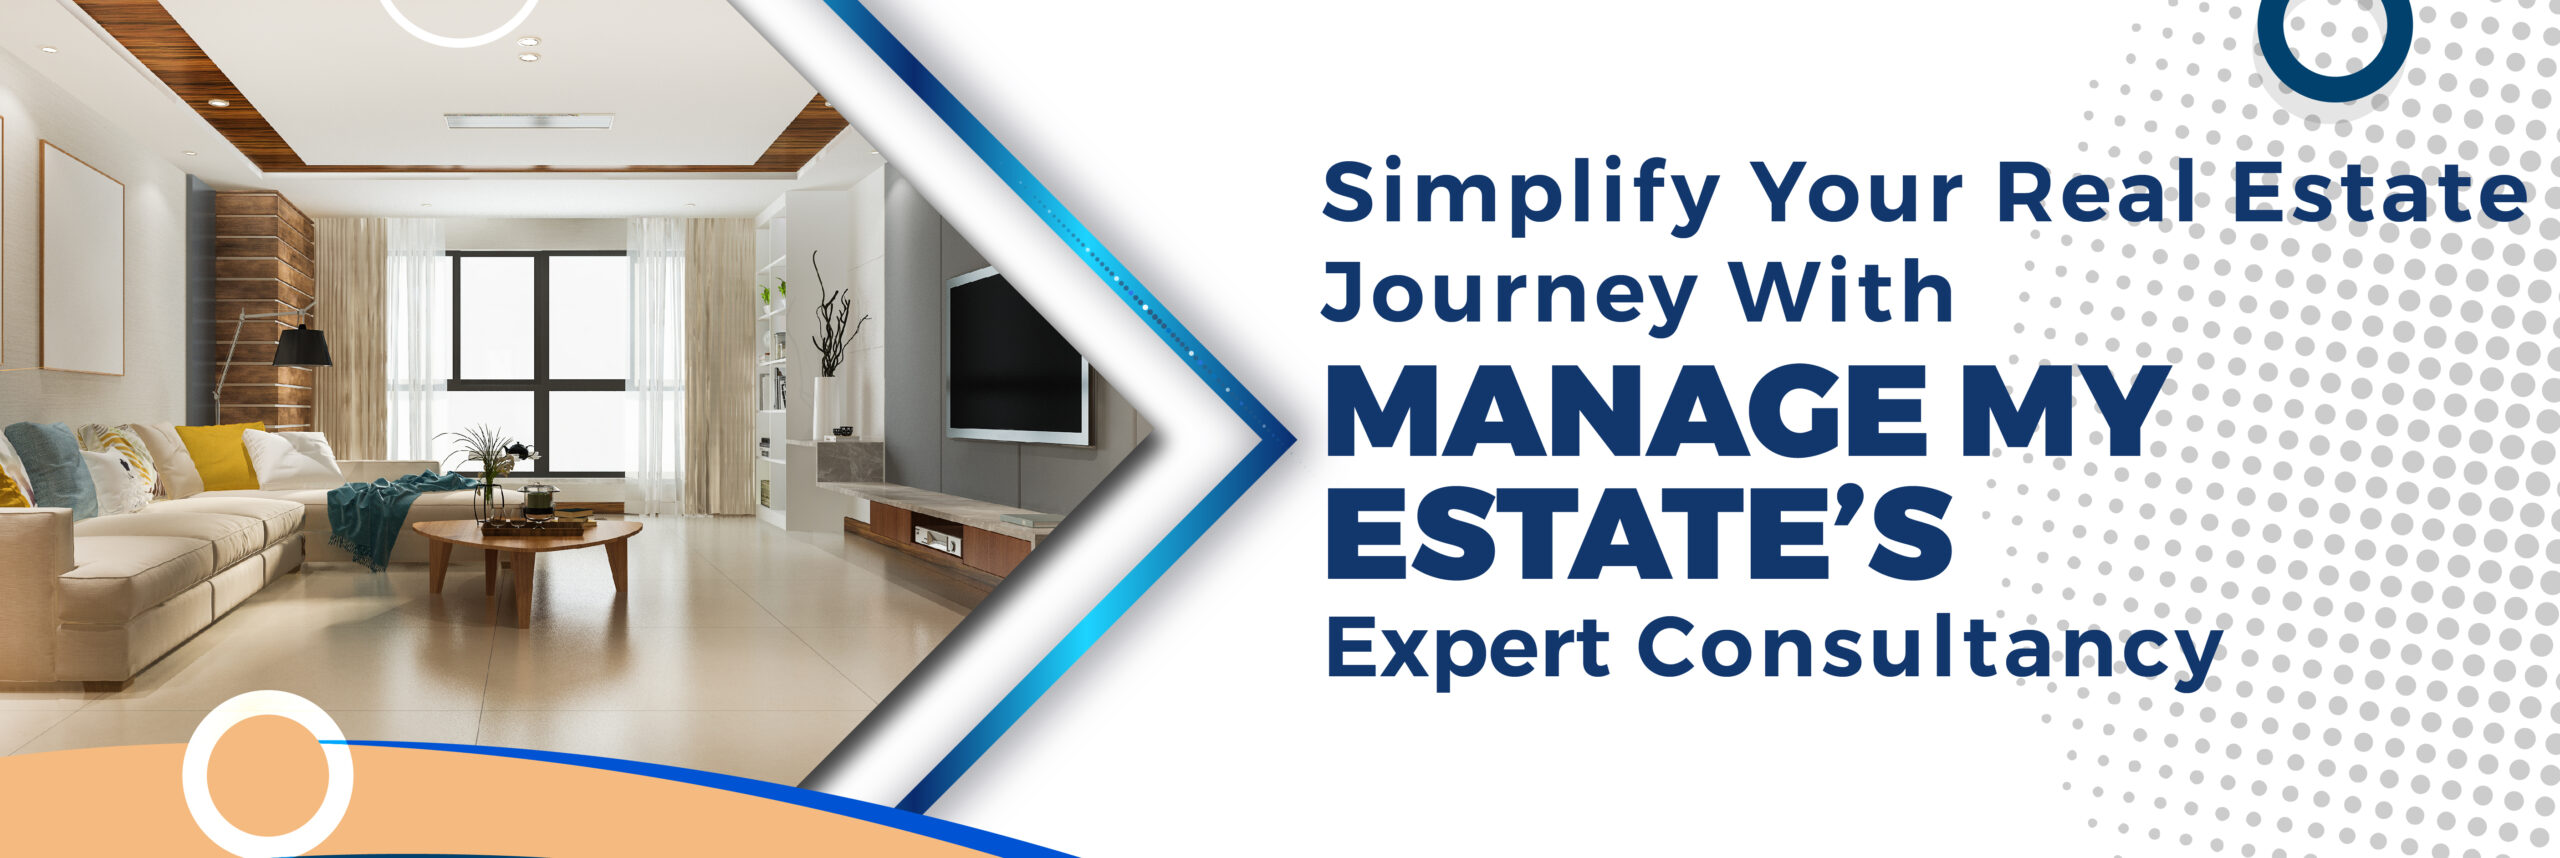 Revolutionising Property Acquisition and Management with a Hassle-Free Journey at MME​ - Managemyestate